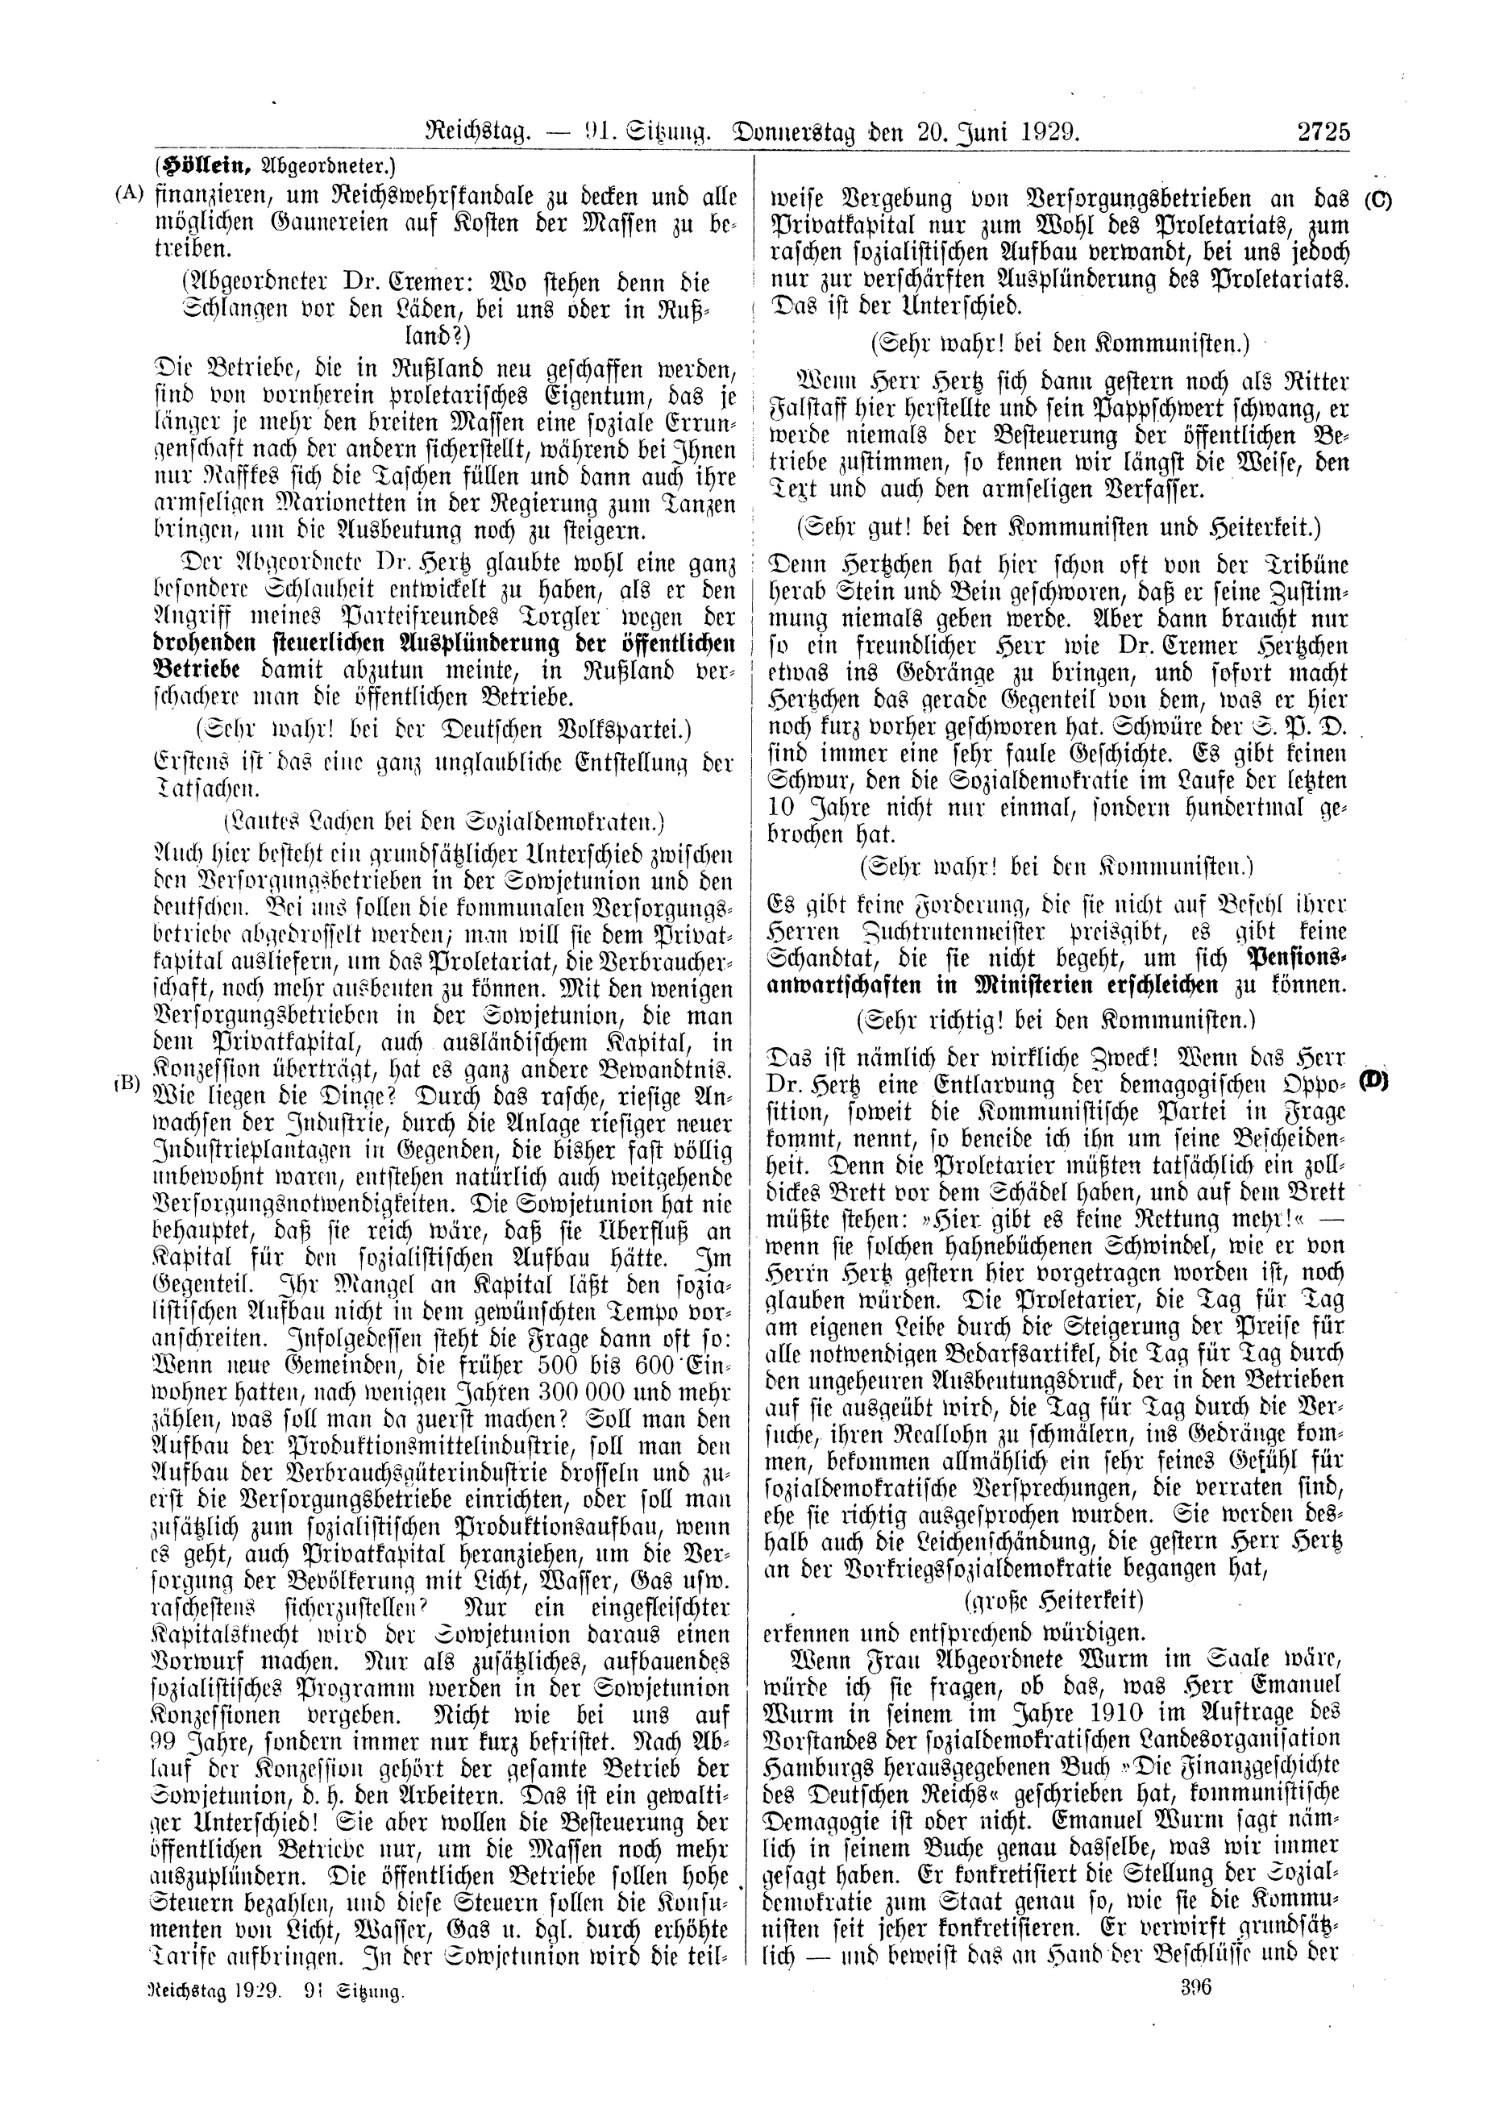 Scan of page 2725